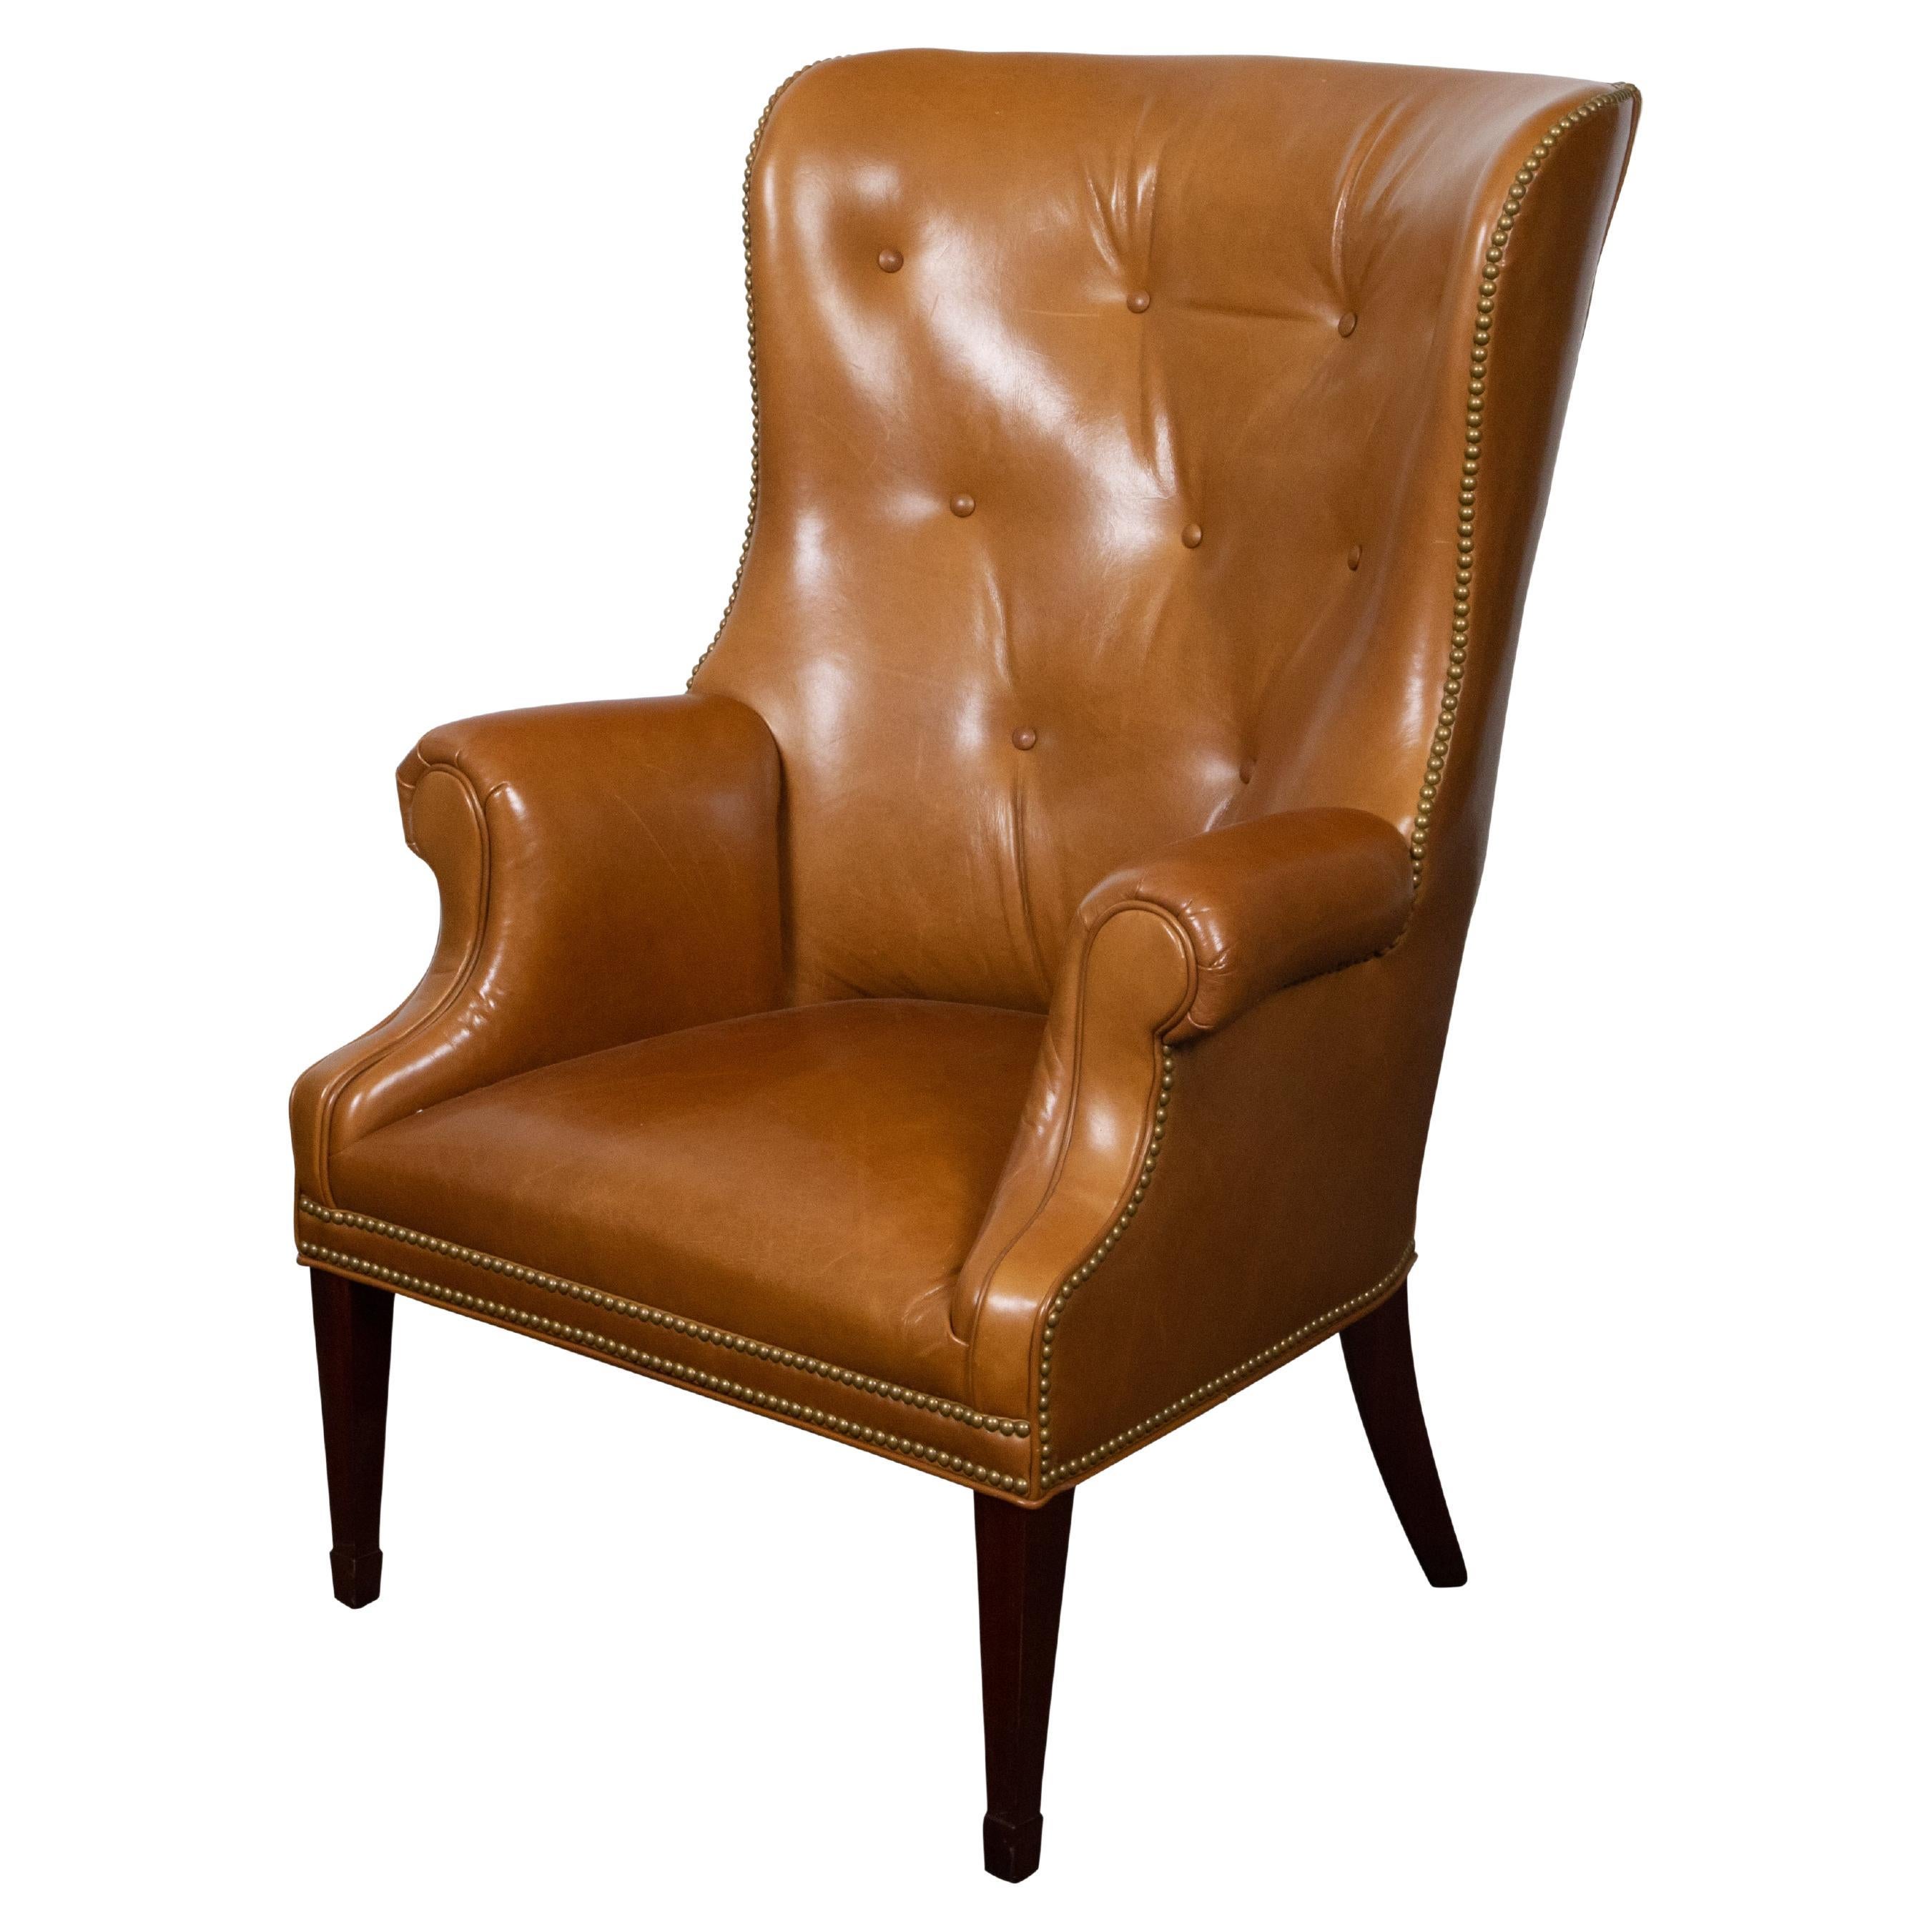 English Brown Leather Wingback Chair with Brass Nailhead Trim, circa 1930-1940 For Sale